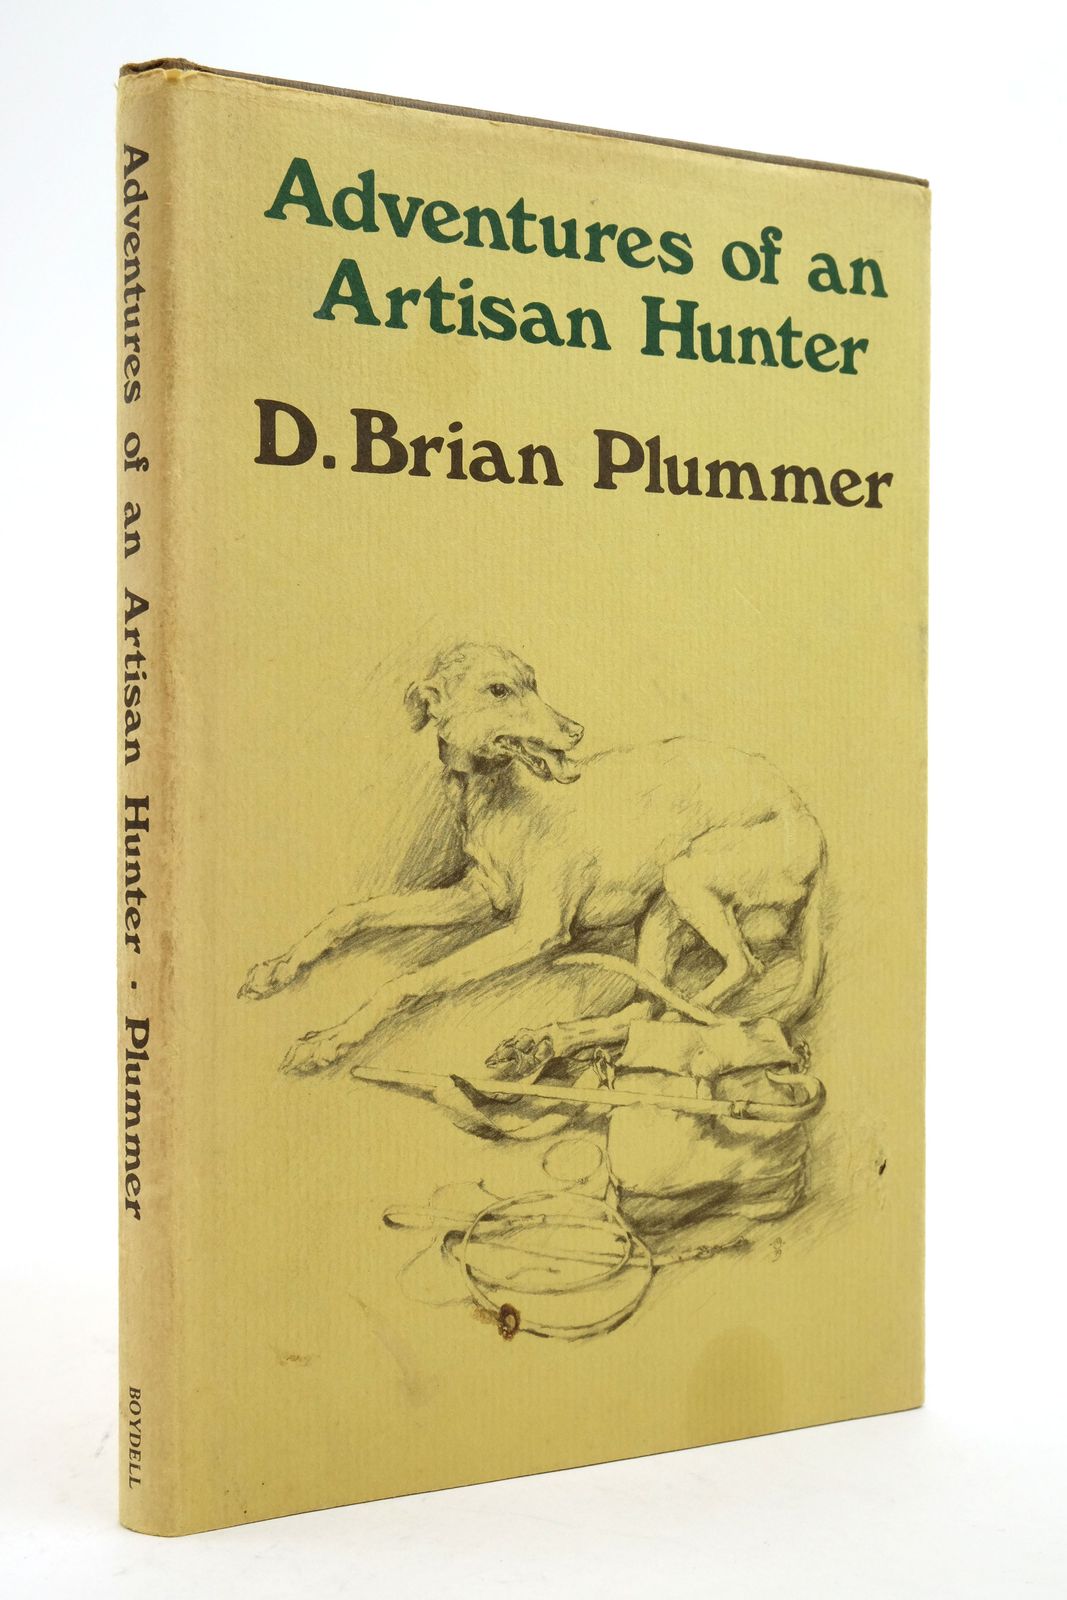 Photo of THE ADVENTURES OF AN ARTISAN HUNTER written by Plummer, David Brian illustrated by Knowelden, Martin published by The Boydell Press (STOCK CODE: 2138818)  for sale by Stella & Rose's Books